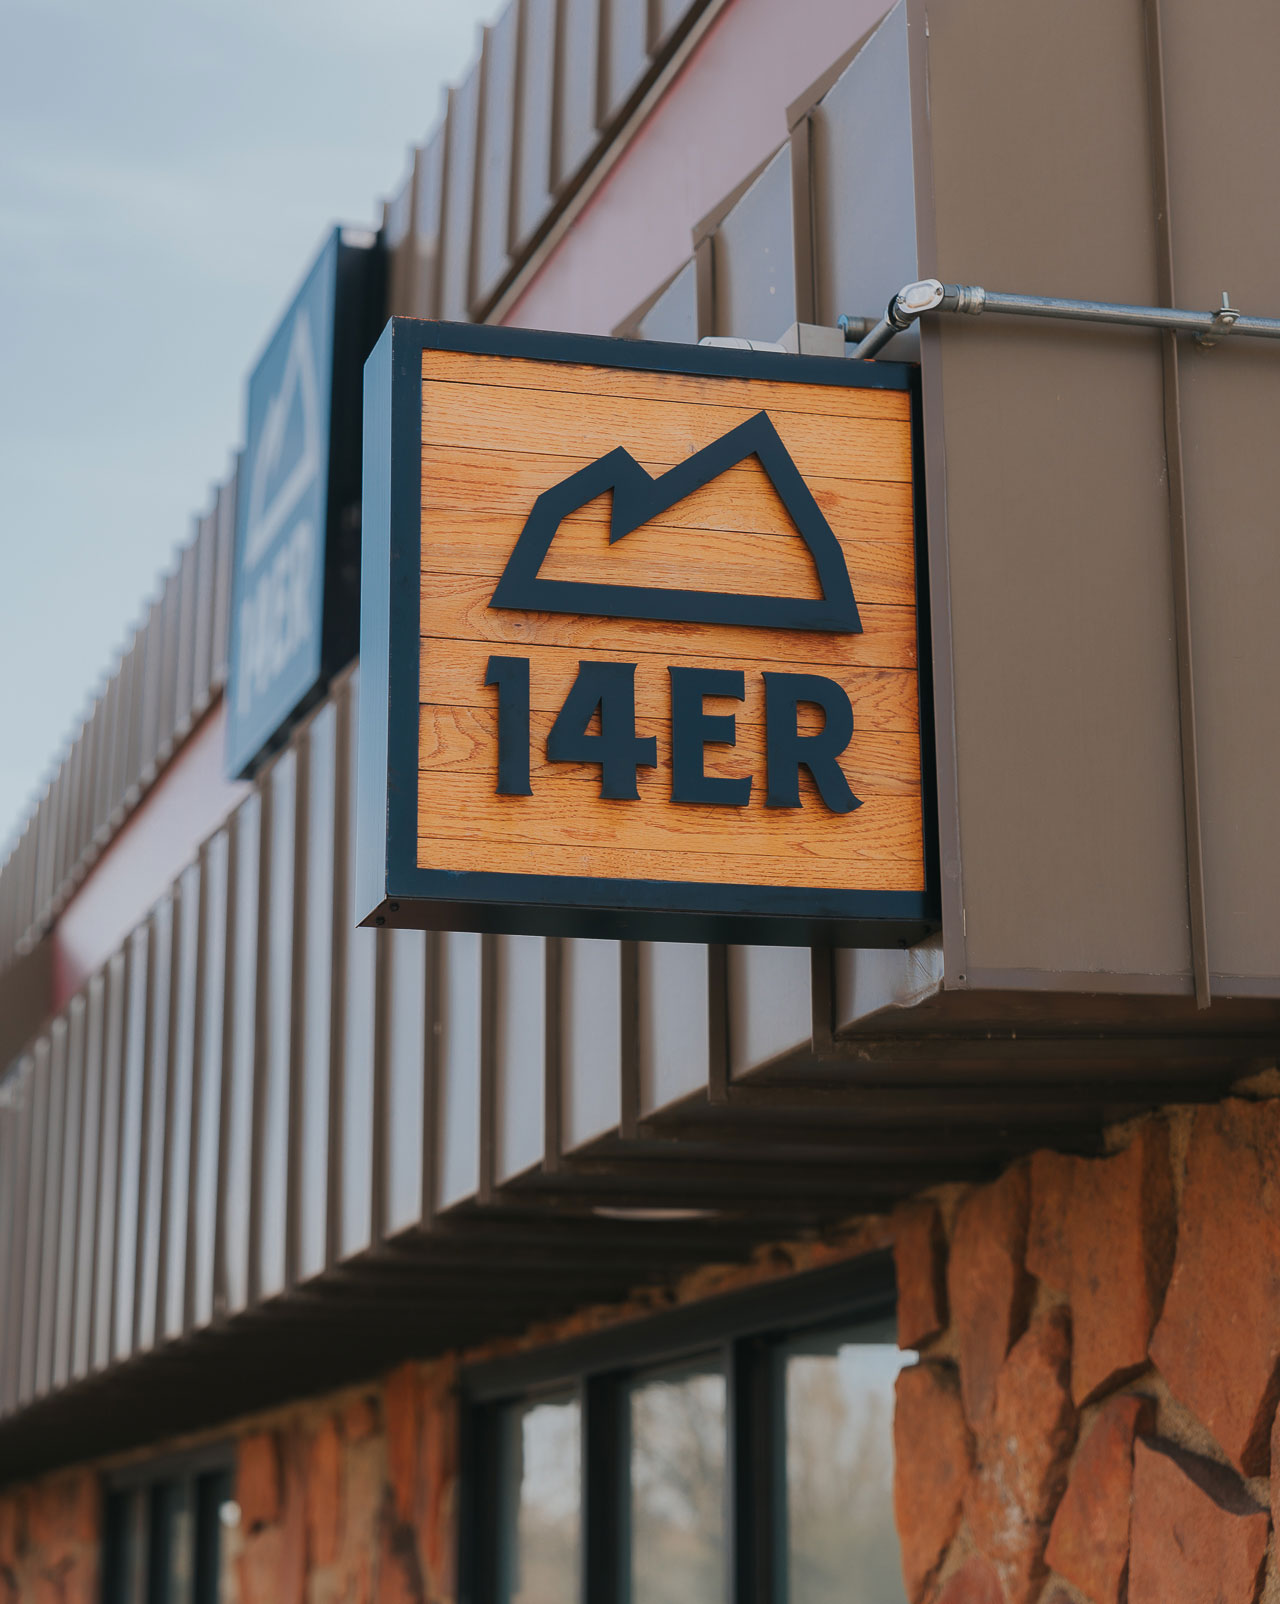 Learn more about the 14er shop!